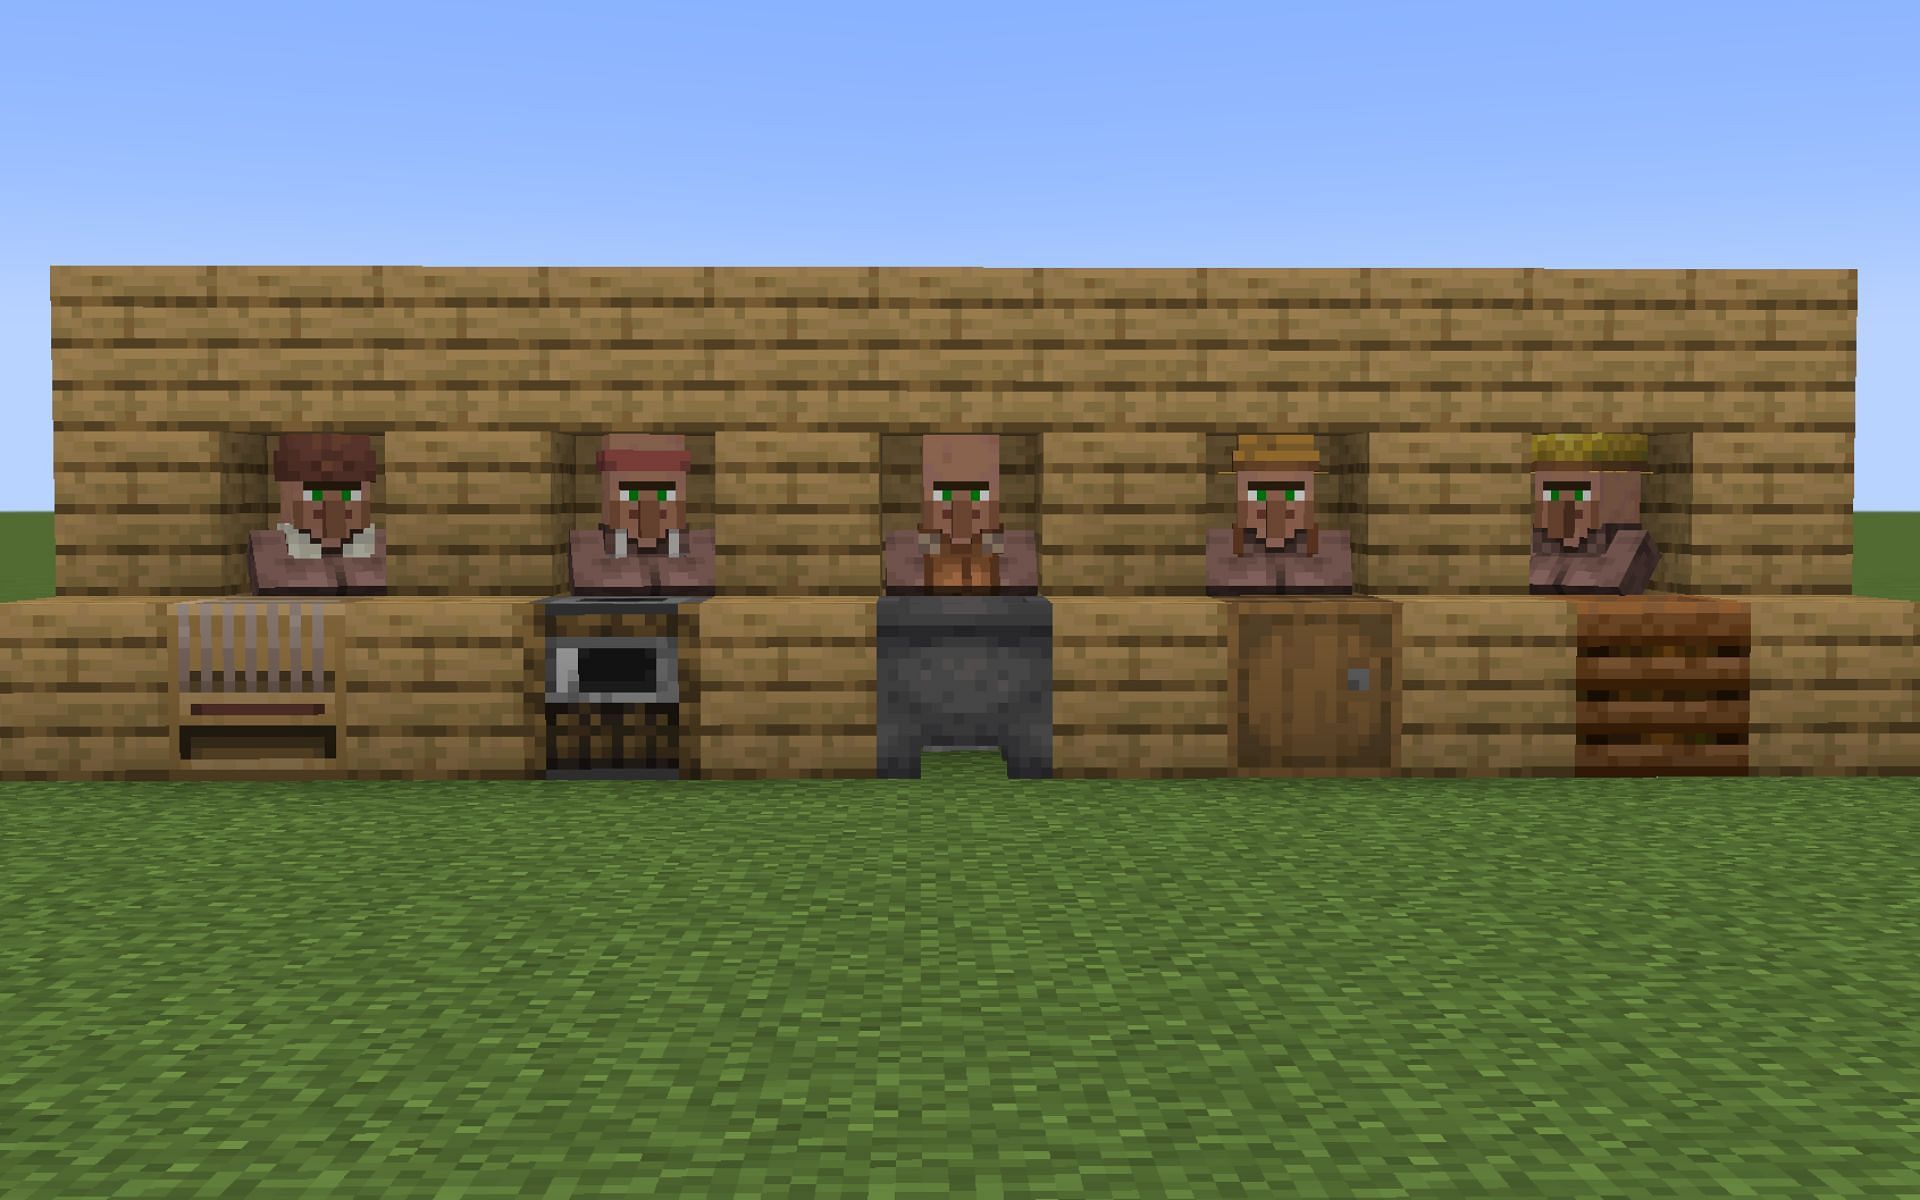 Players can get loads of XP from an established villager trading center in Minecraft 1.19 (Image via Mojang)